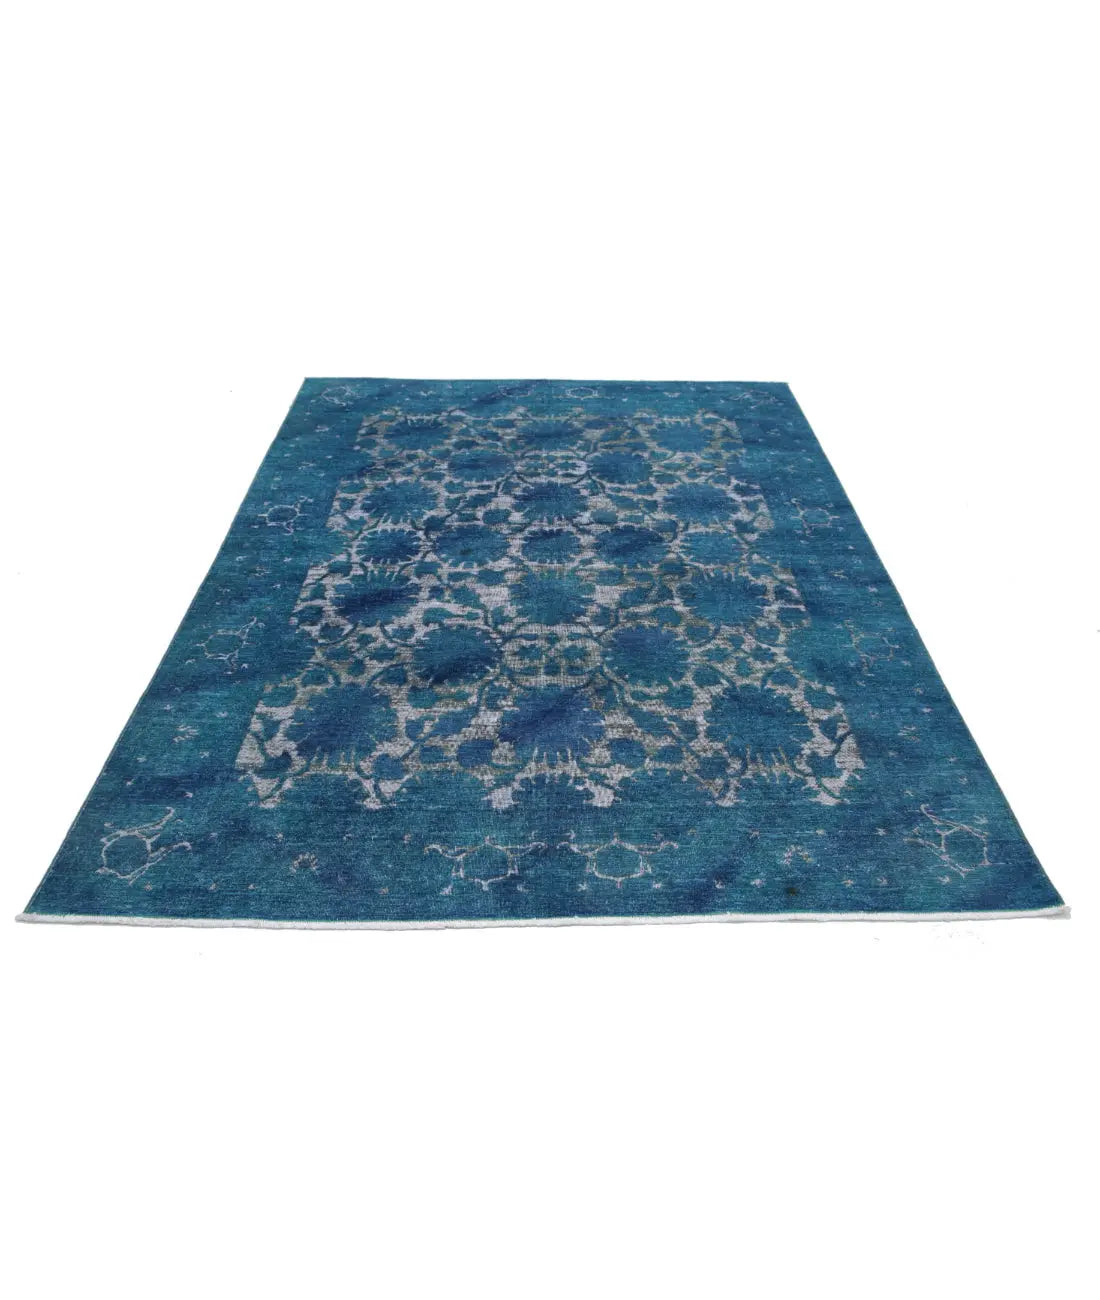 Hand Knotted Onyx Wool Rug - 6'1'' x 8'1''